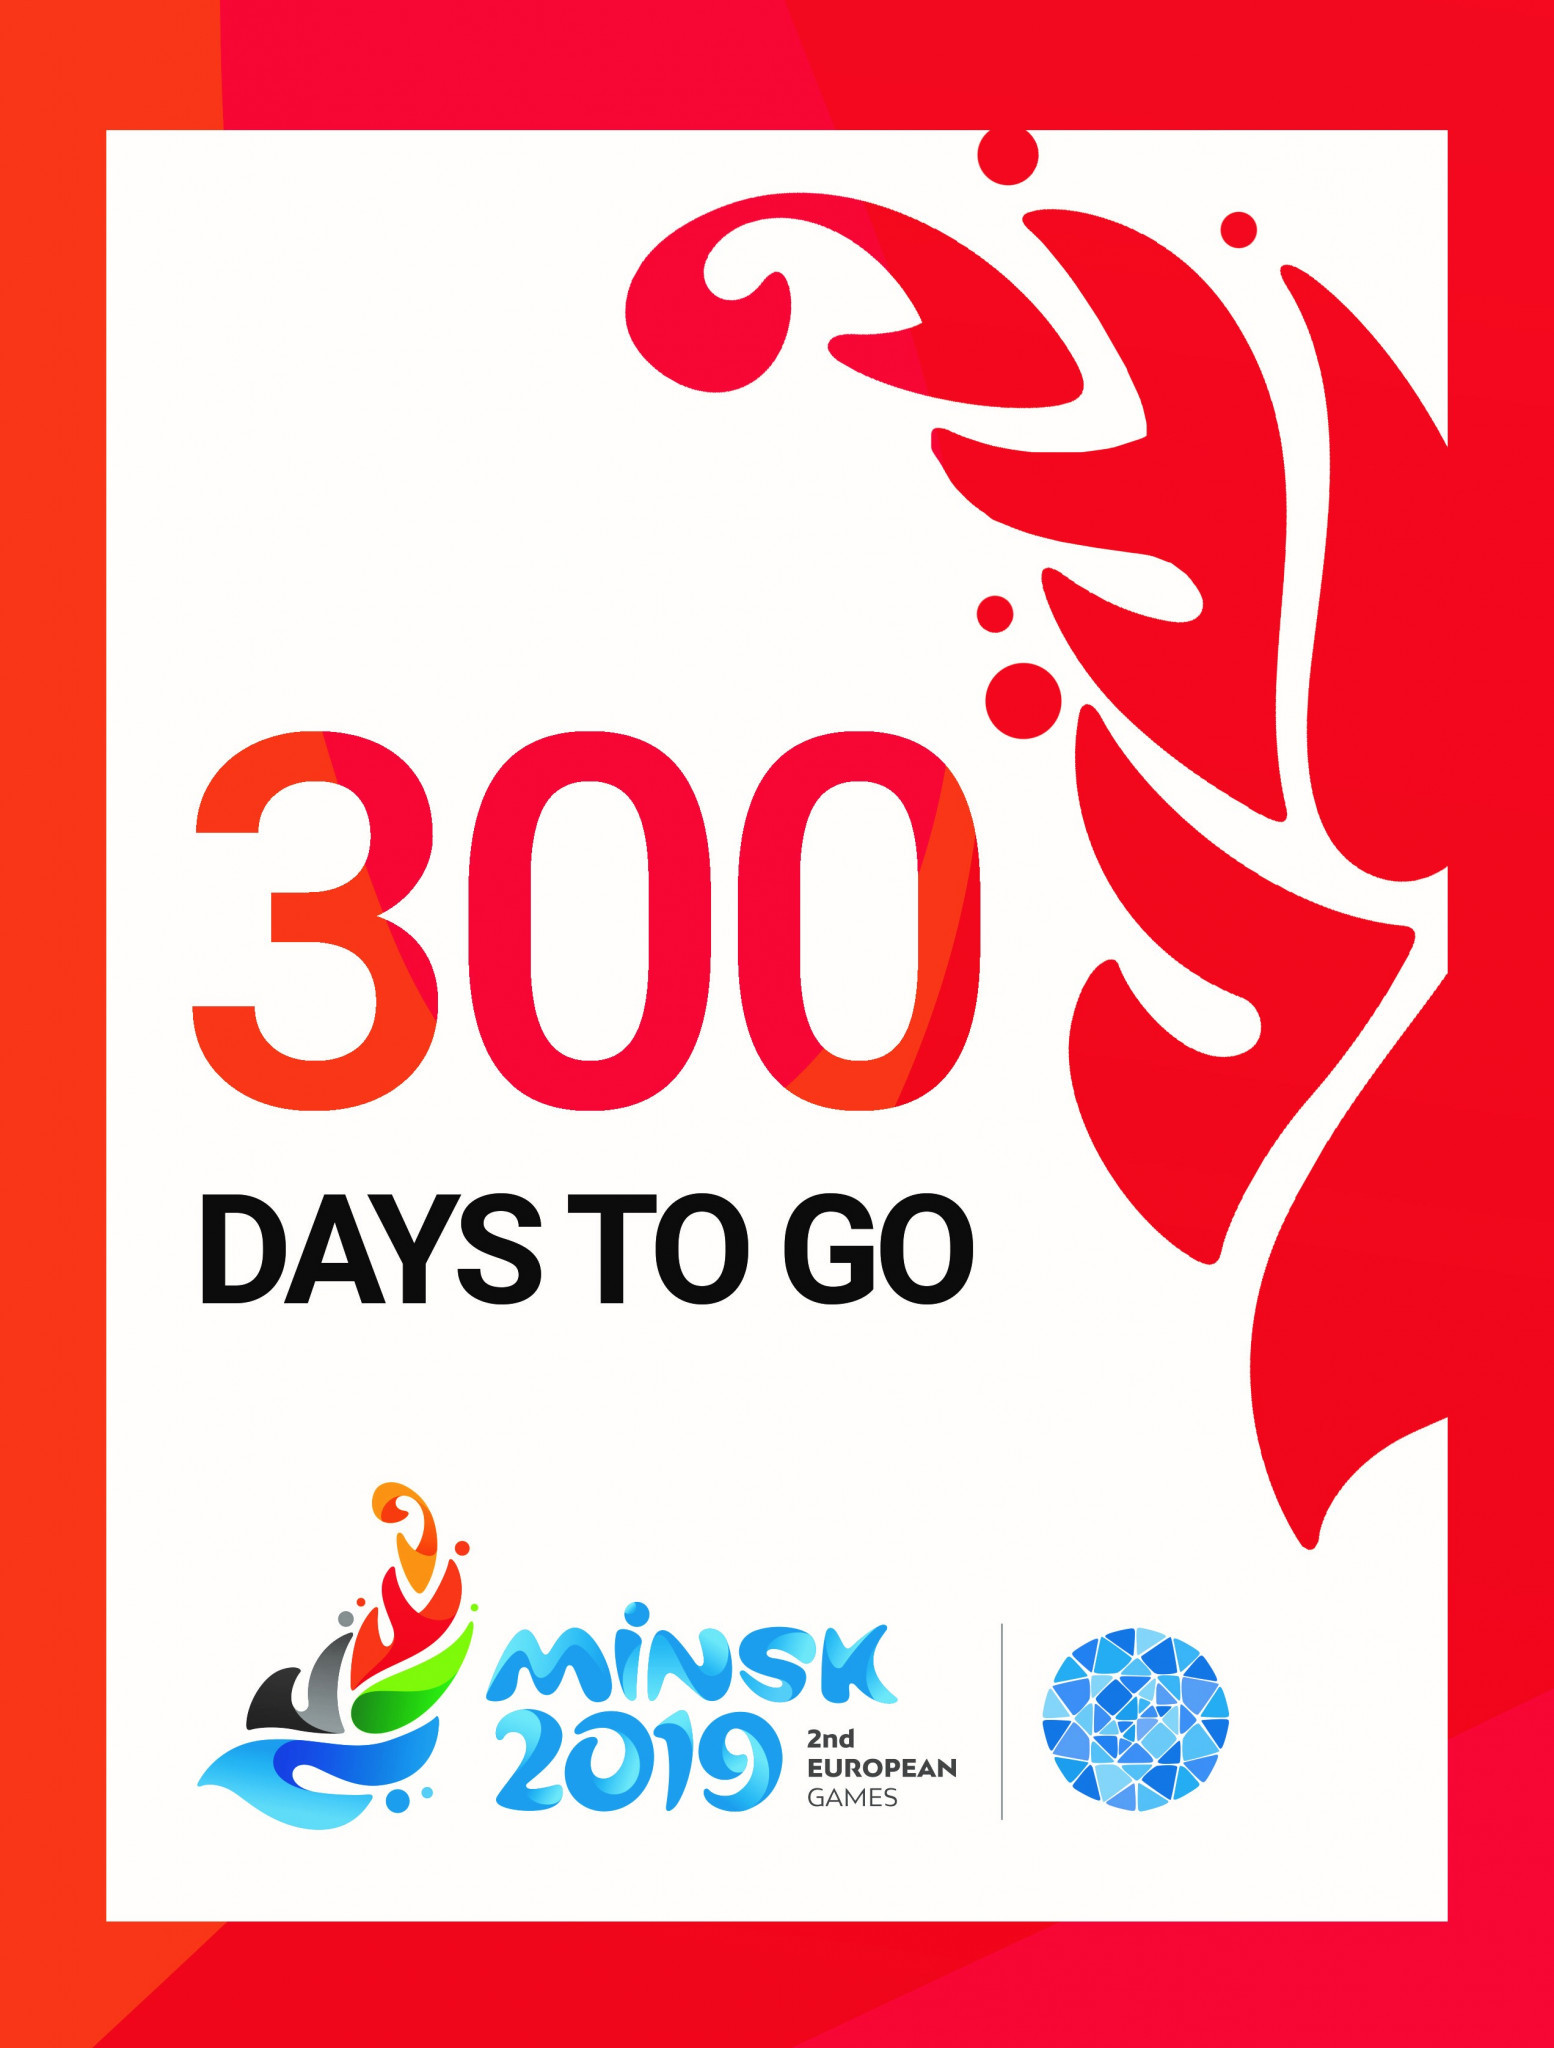 Clegg expresses "full confidence" in Minsk 2019 as city marks 300 days countdown